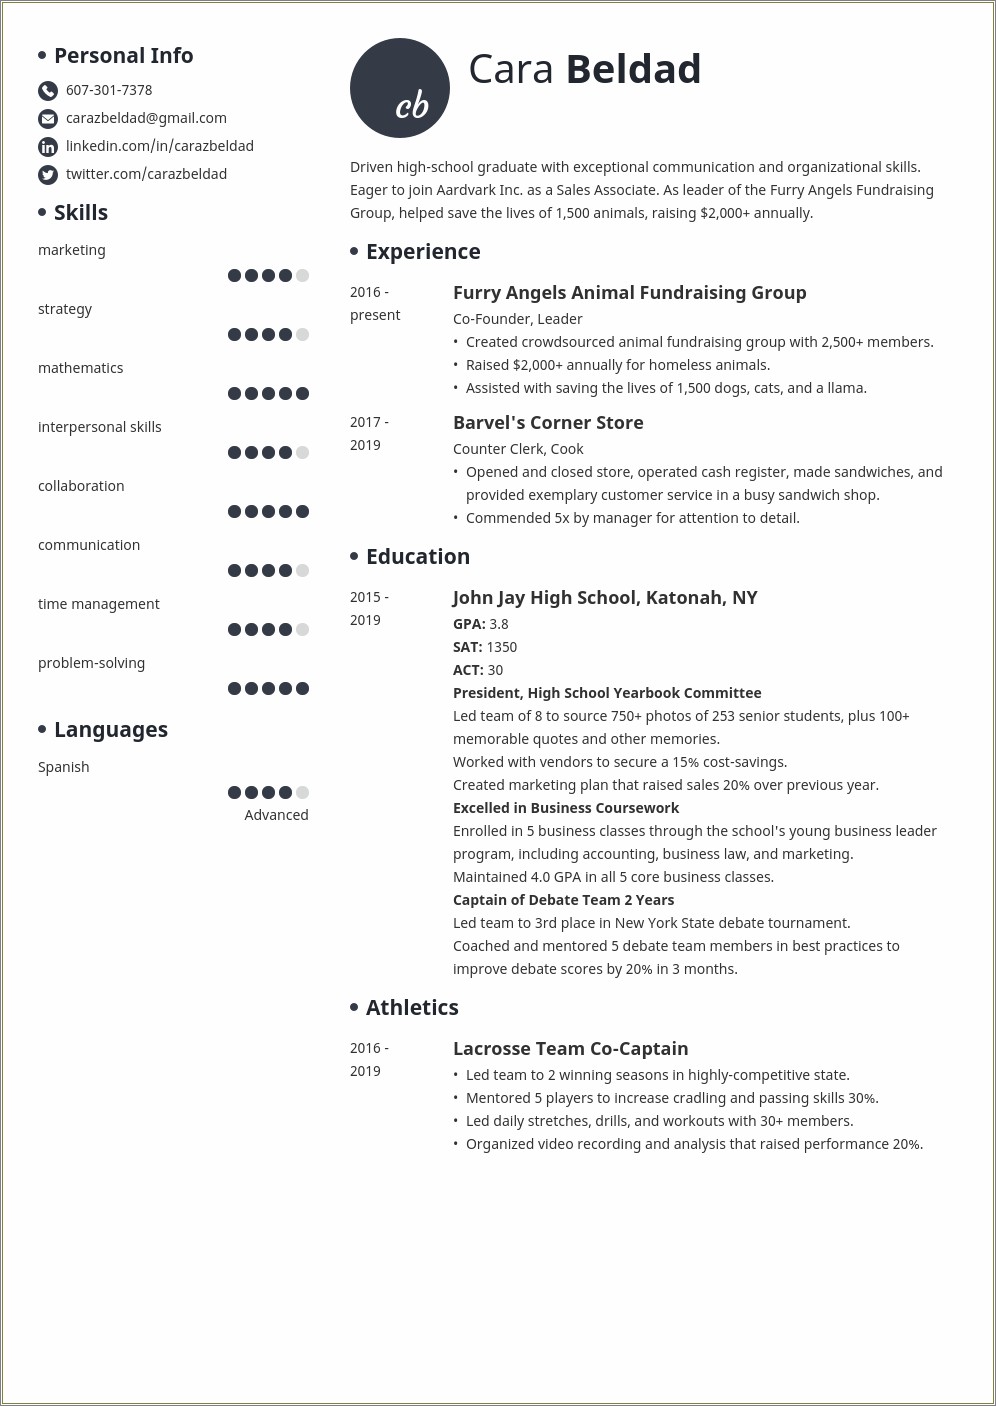 Resume For Someone With High School Diploma